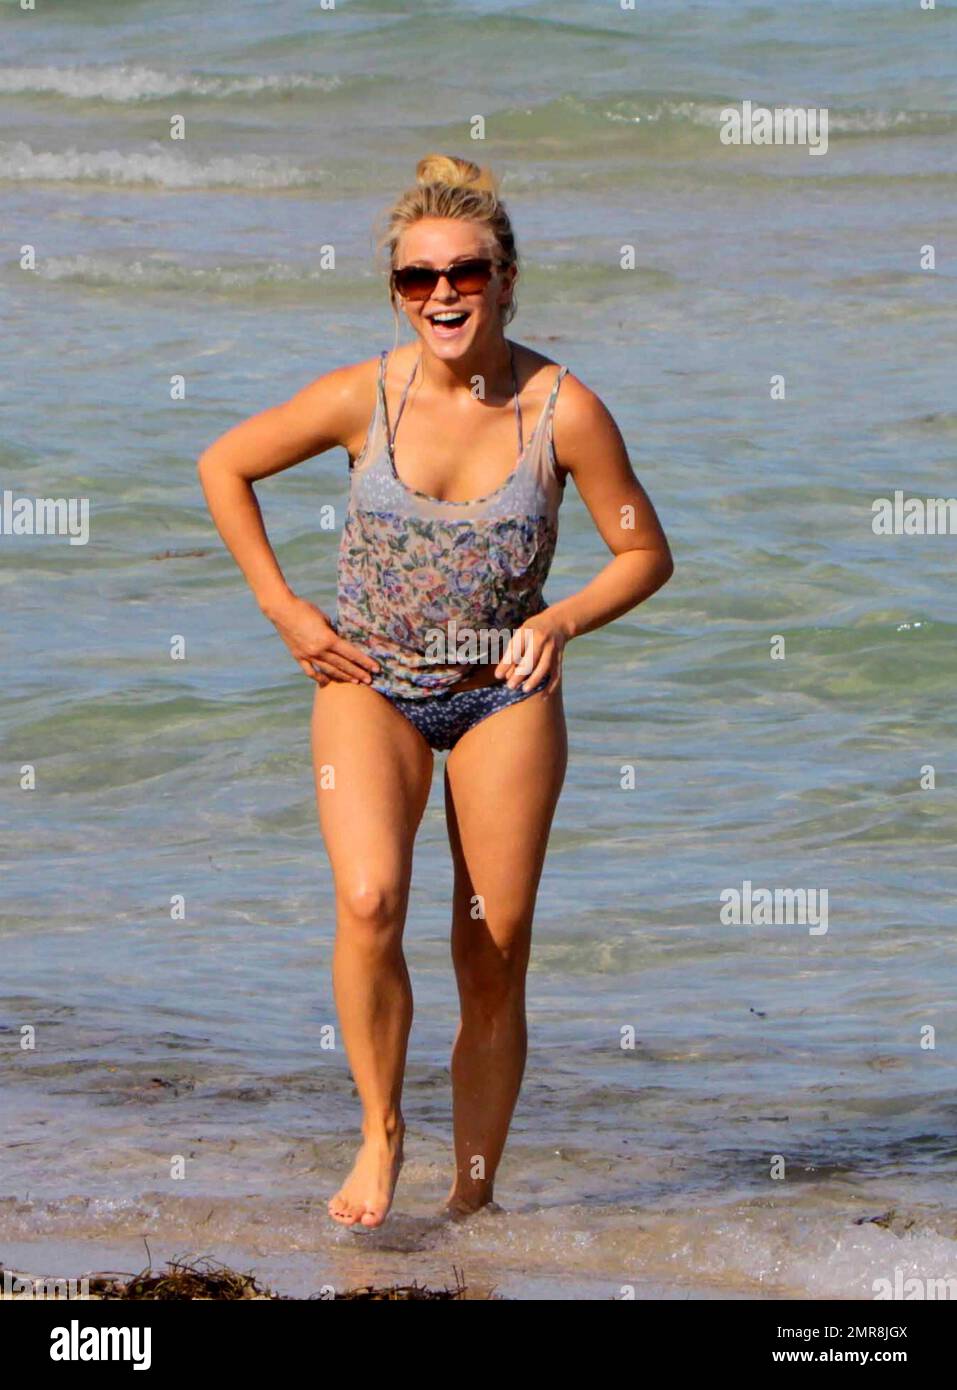 Julianne Hough, spends an early birthday weekend with her boyfriend Ryan Seacrest, brother Derek Hough, mother Mari Anne and best friend Maude who all flew into Miami to be with the actress who is currently filming Rock Of Ages. Julianne wore a blue bikini to take a dip in the hotel pool and also ventured into the ocean with the group who all appeared to be having a great time. Julianne will turn 23 on Wednesday. Miami Beach, FL. 7/16/11.   . Stock Photo